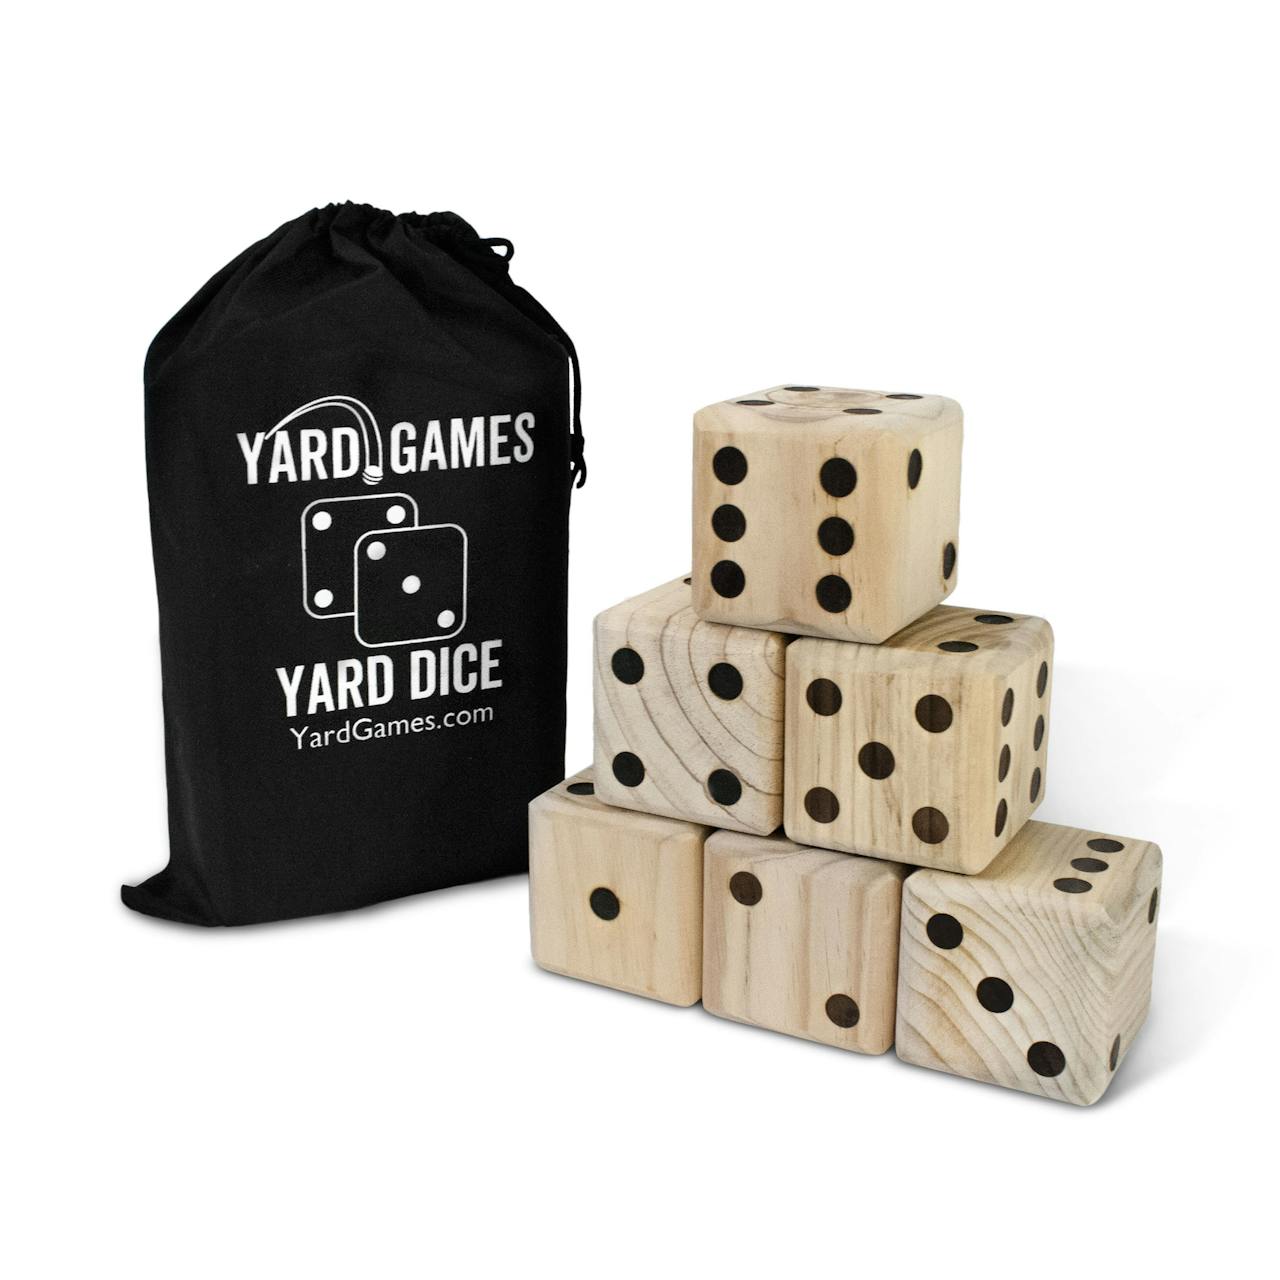 Yard Games Giant Wooden Yard Dice